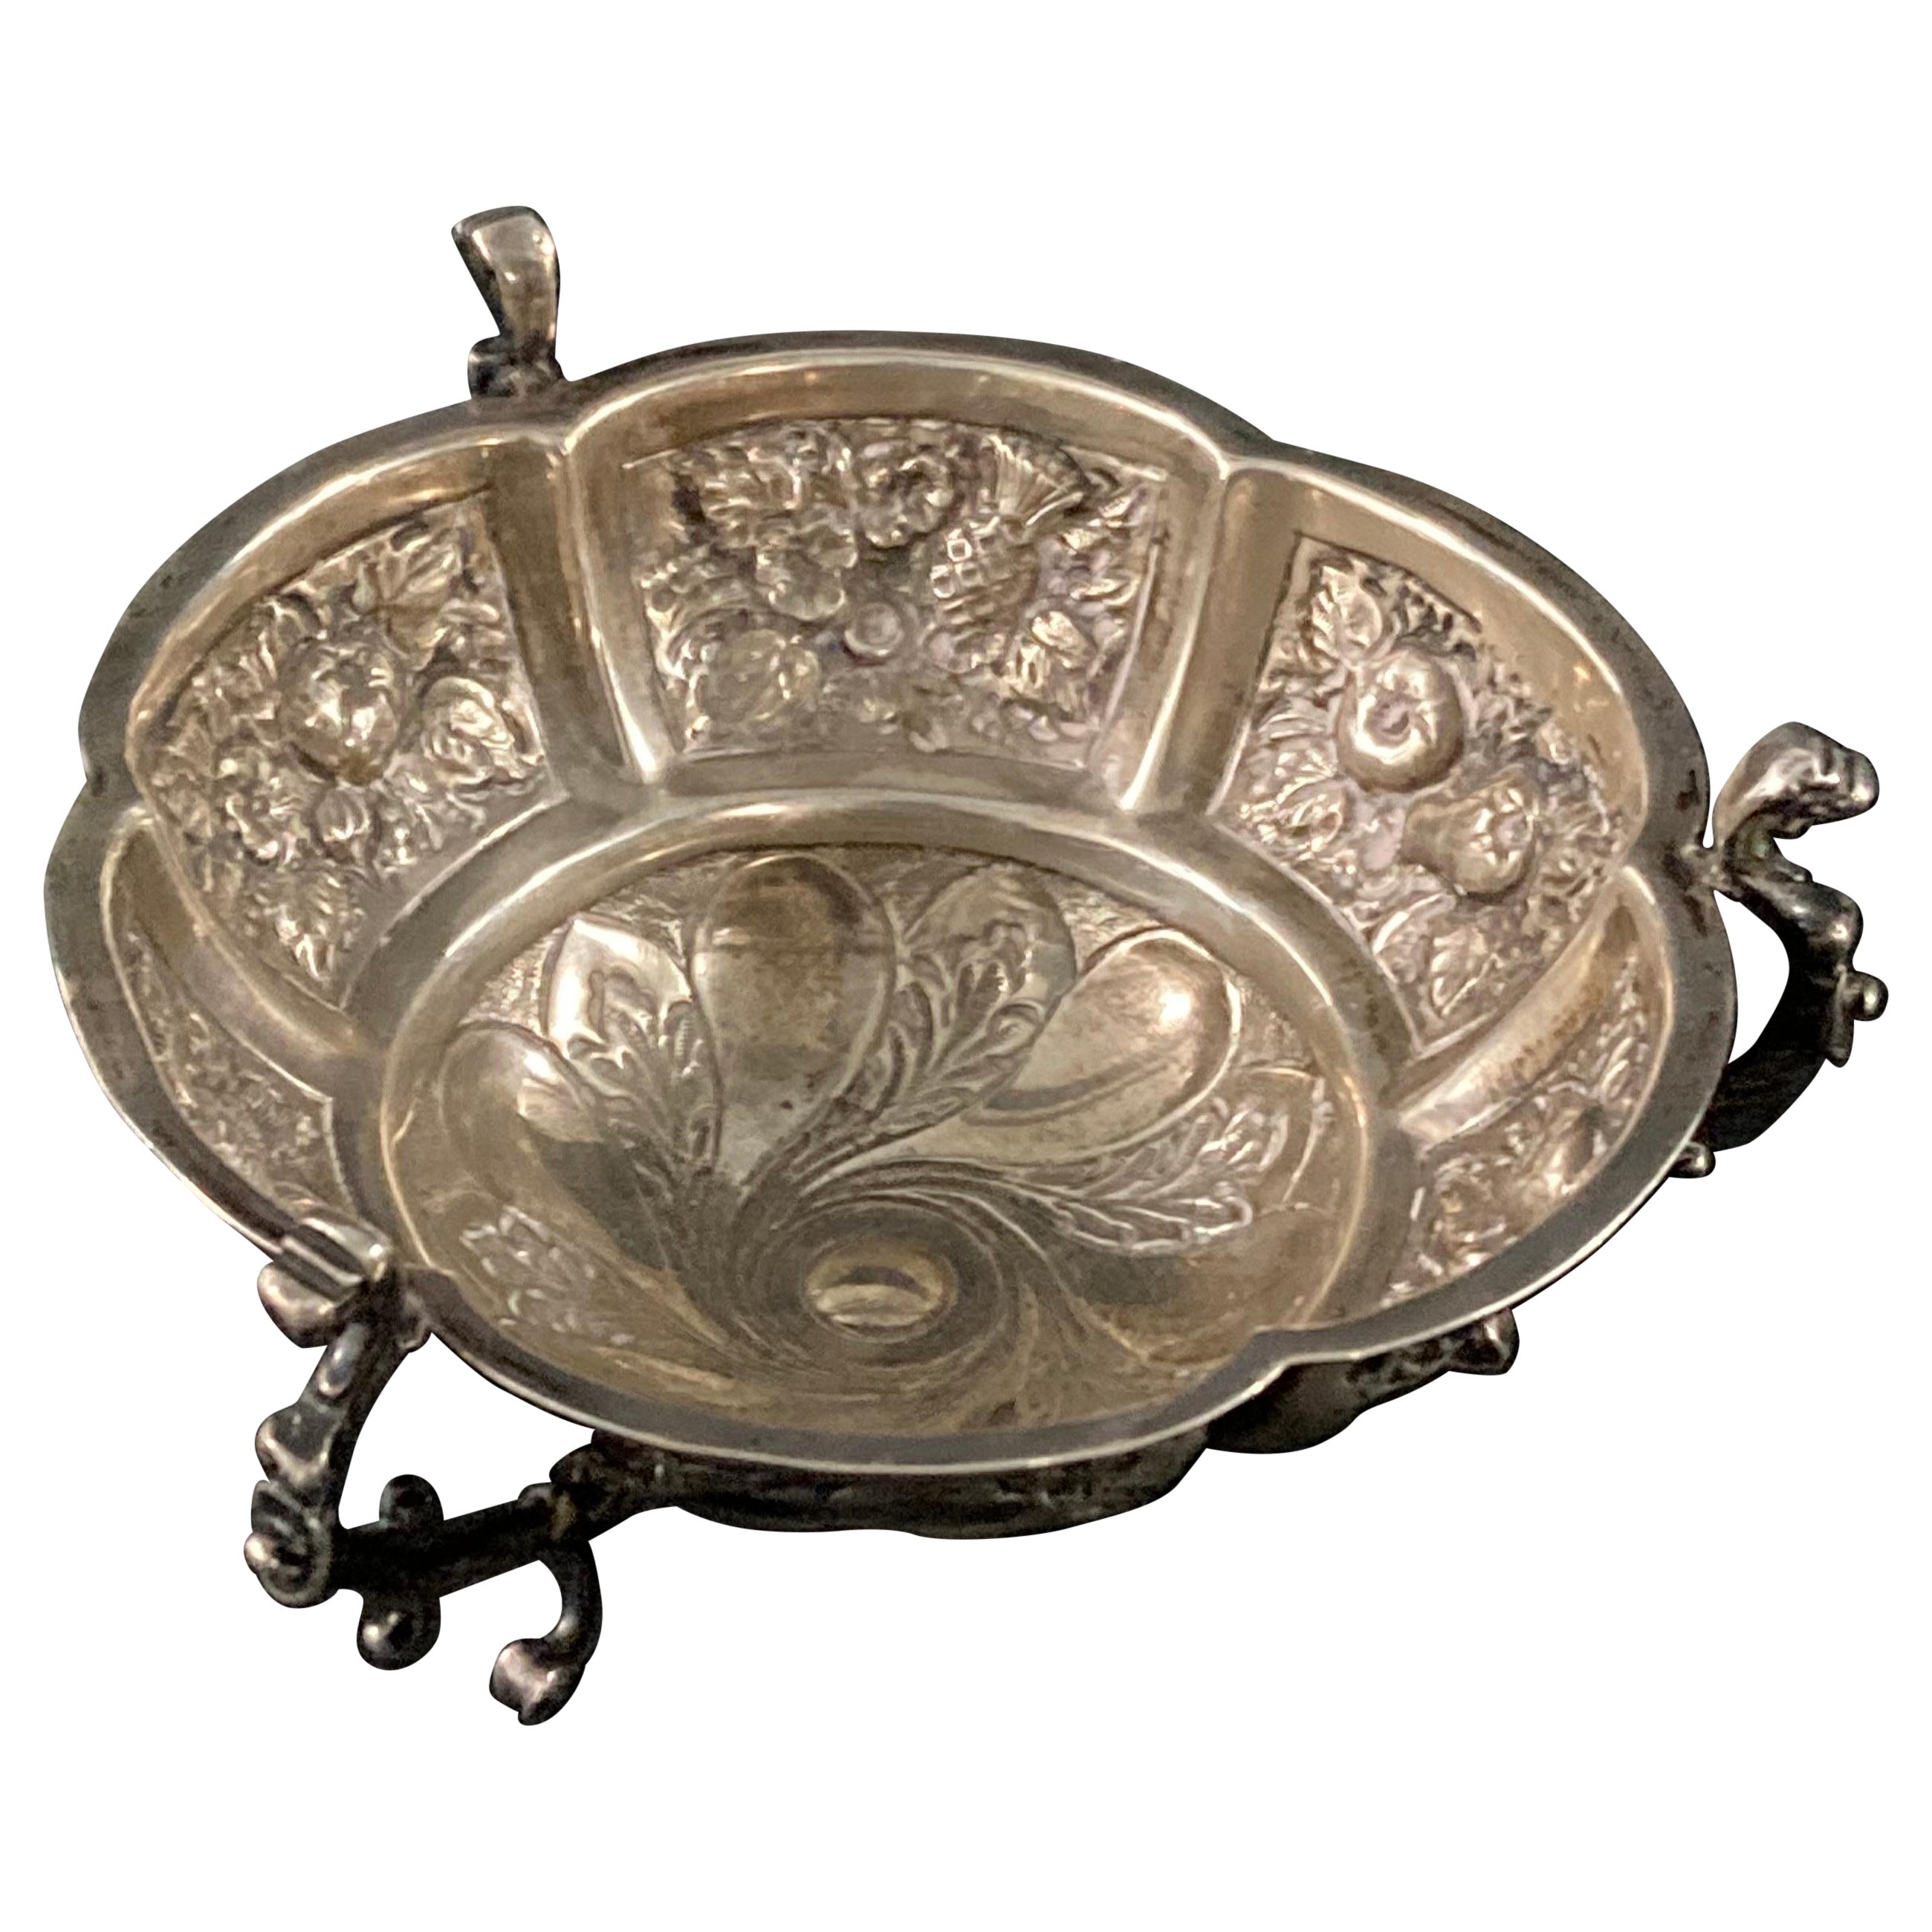 A Victorian 1898 silver footed dish by Mappin & Webb London.

Circular repoussé decoration dish supported by tripartite legs.

Perfect for use as a trinket dish as a bon-bon or condiment dish or simply a lovely ornamental object that displays